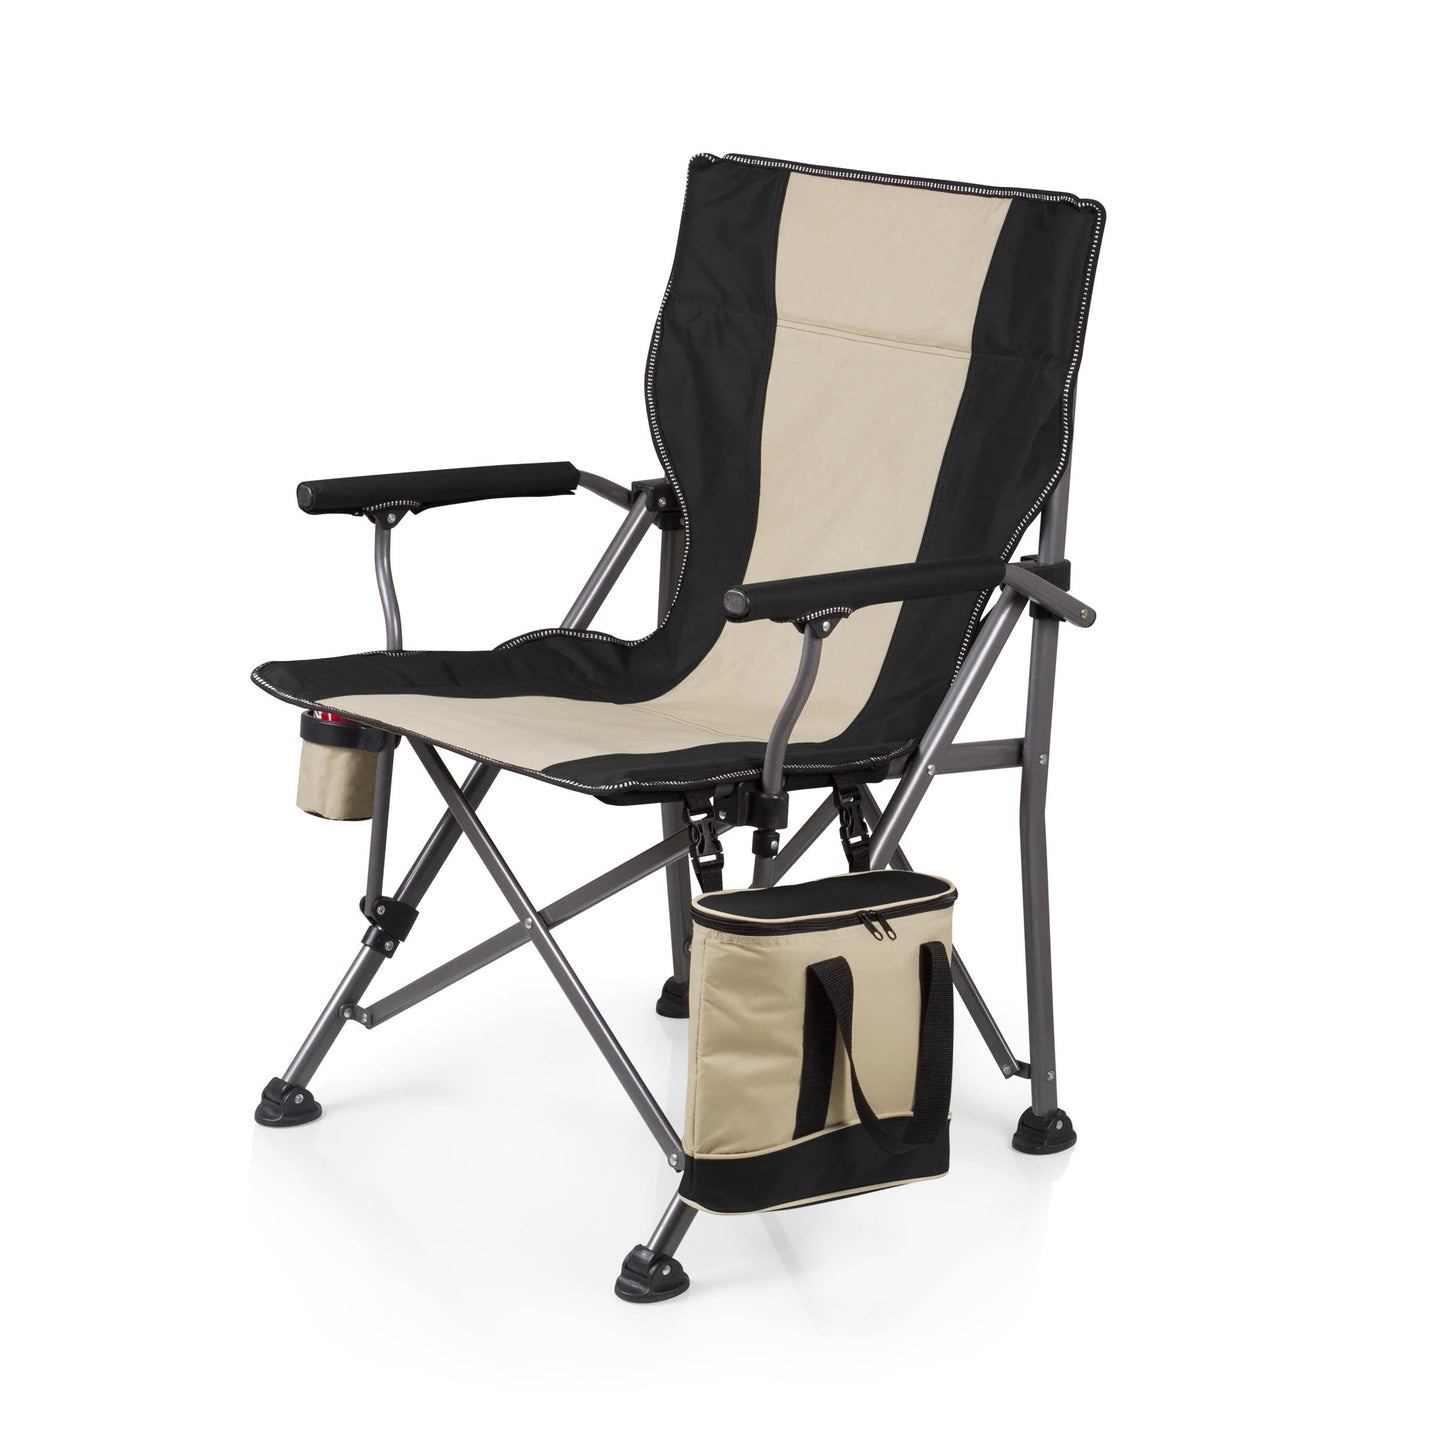 New England Patriots - Outlander Folding Camping Chair with Cooler